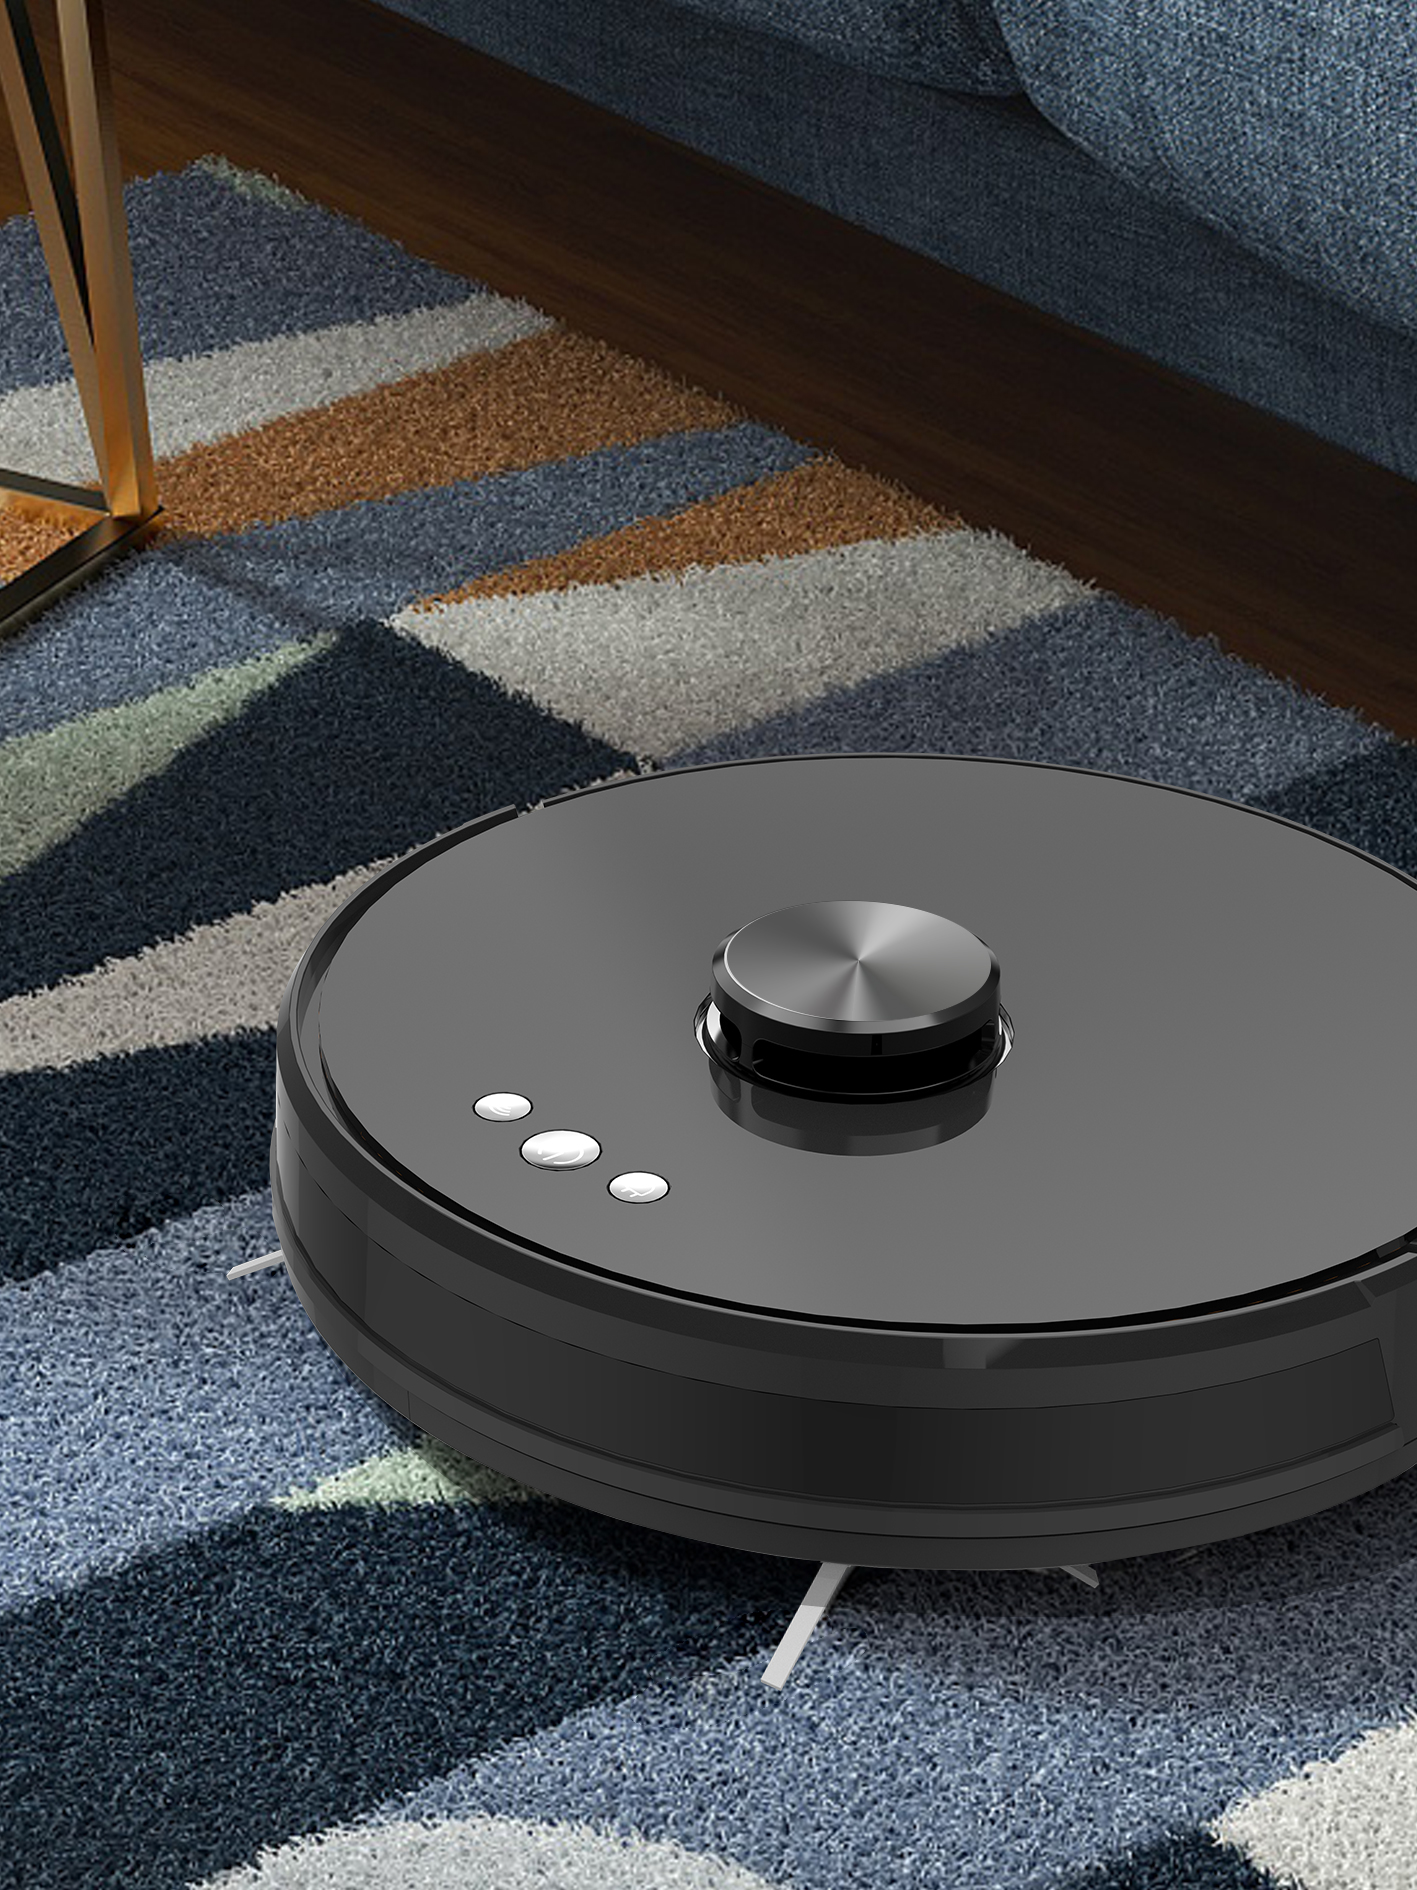 Robot Vacuum Cleaner For Carpet And Hardwood with Integrated Sensors